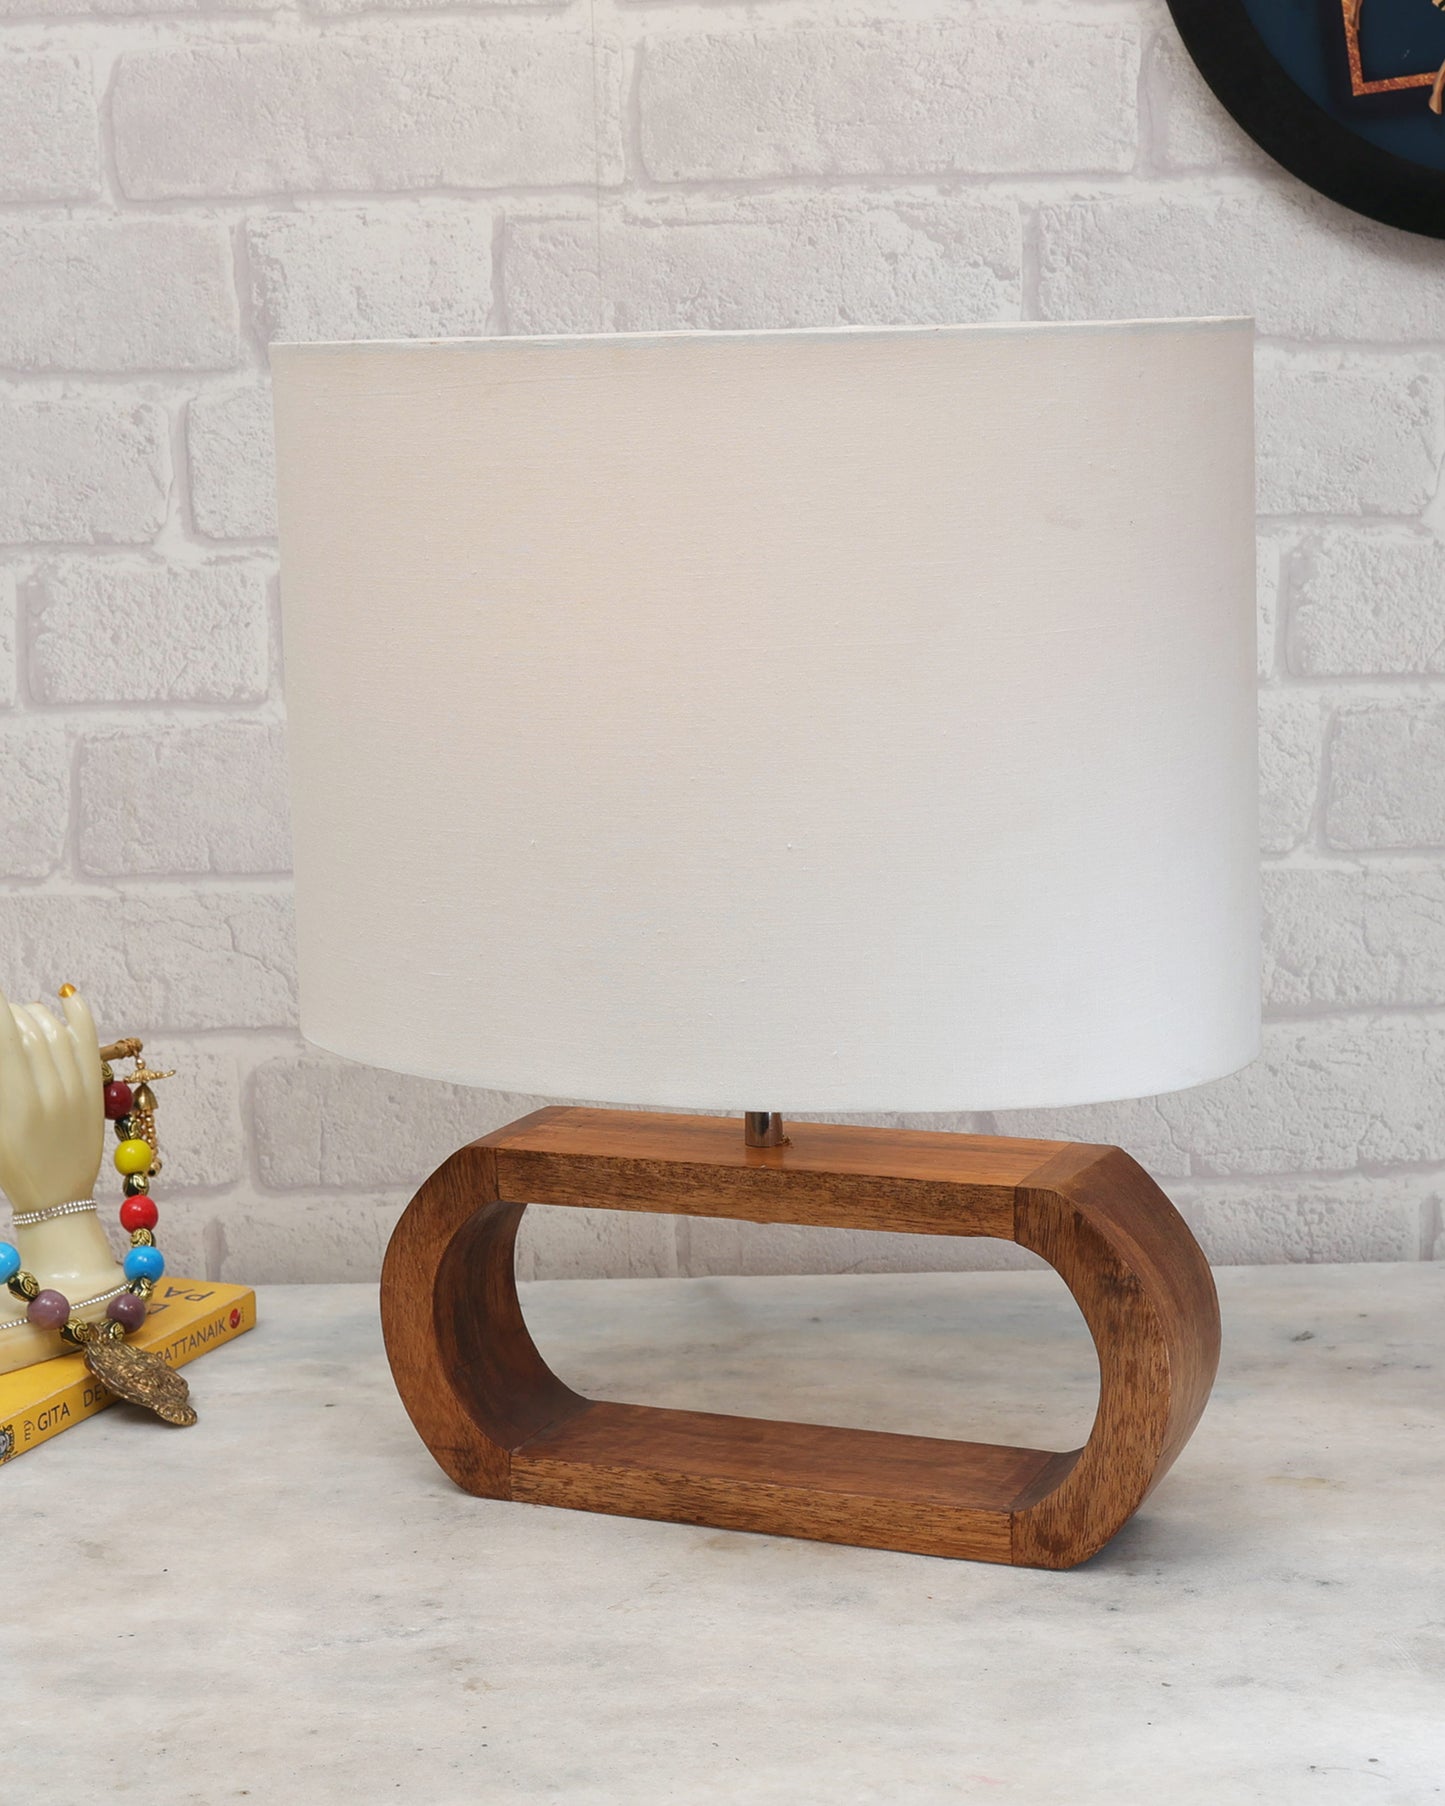 Wood Table Lamp French Country Rustic Bedside Desk Nightstand Lamp for Bedroom Living Room Office LED Bulb Included, Walnut Oblong